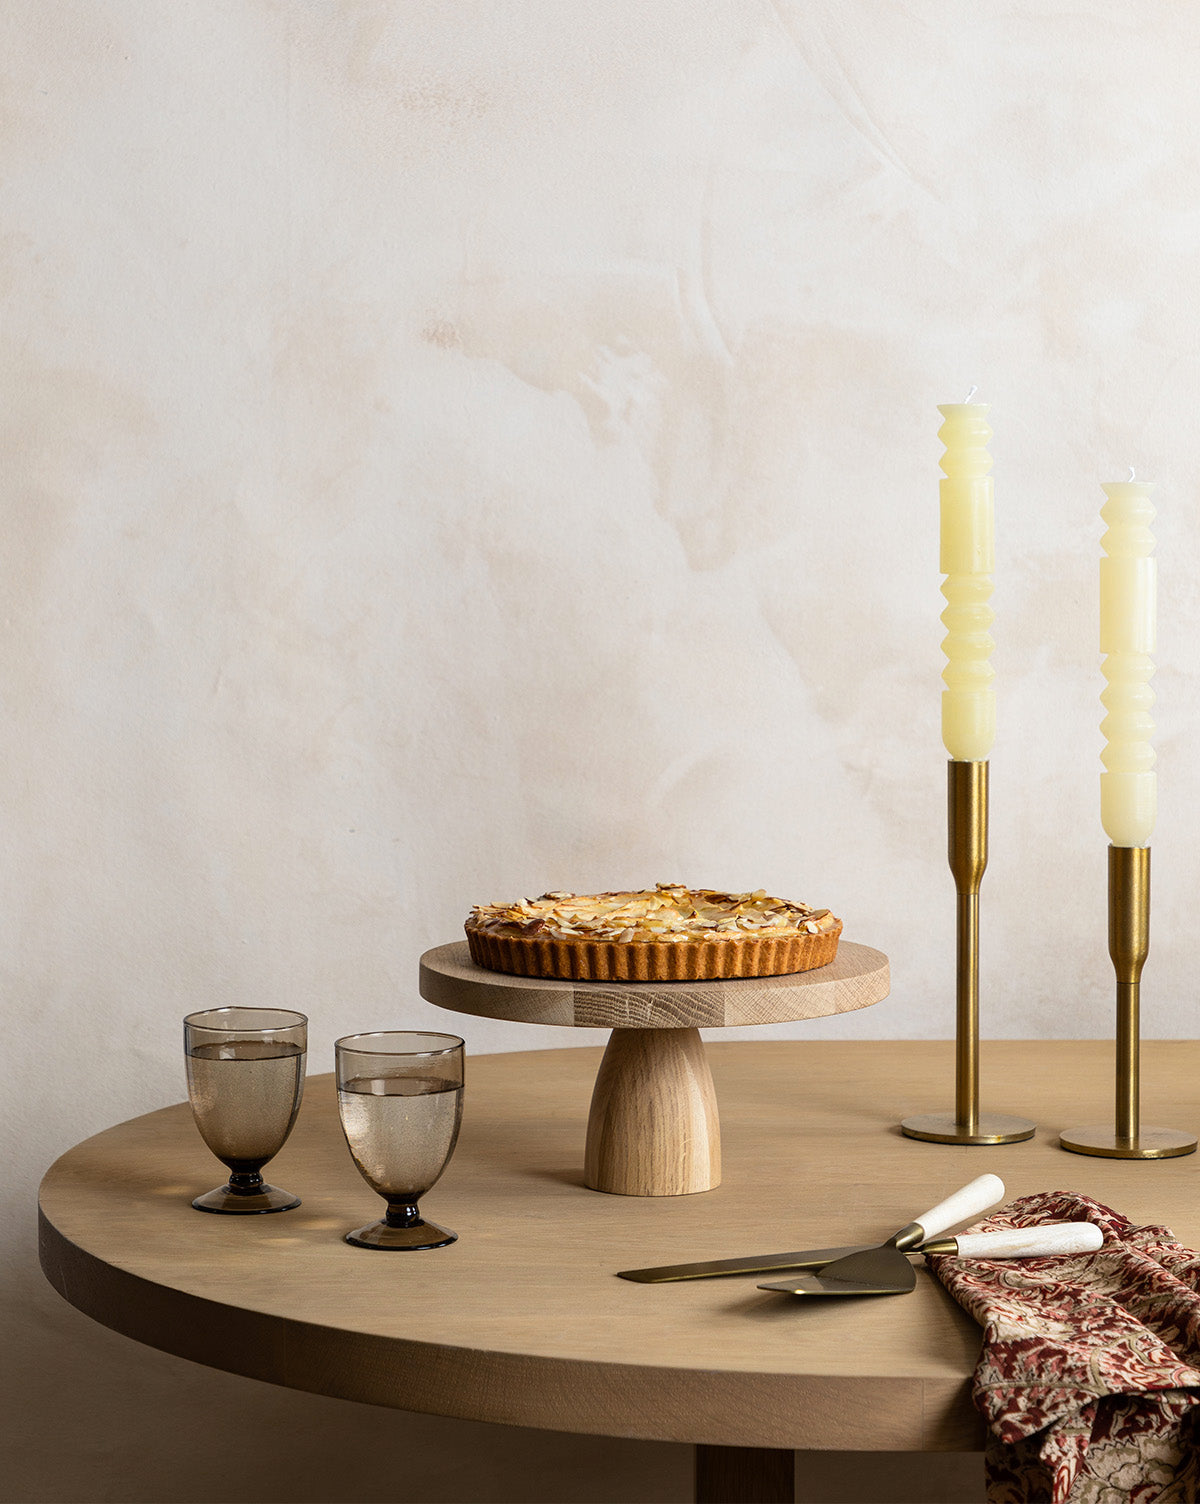 Cake Stands – Arife Online Store